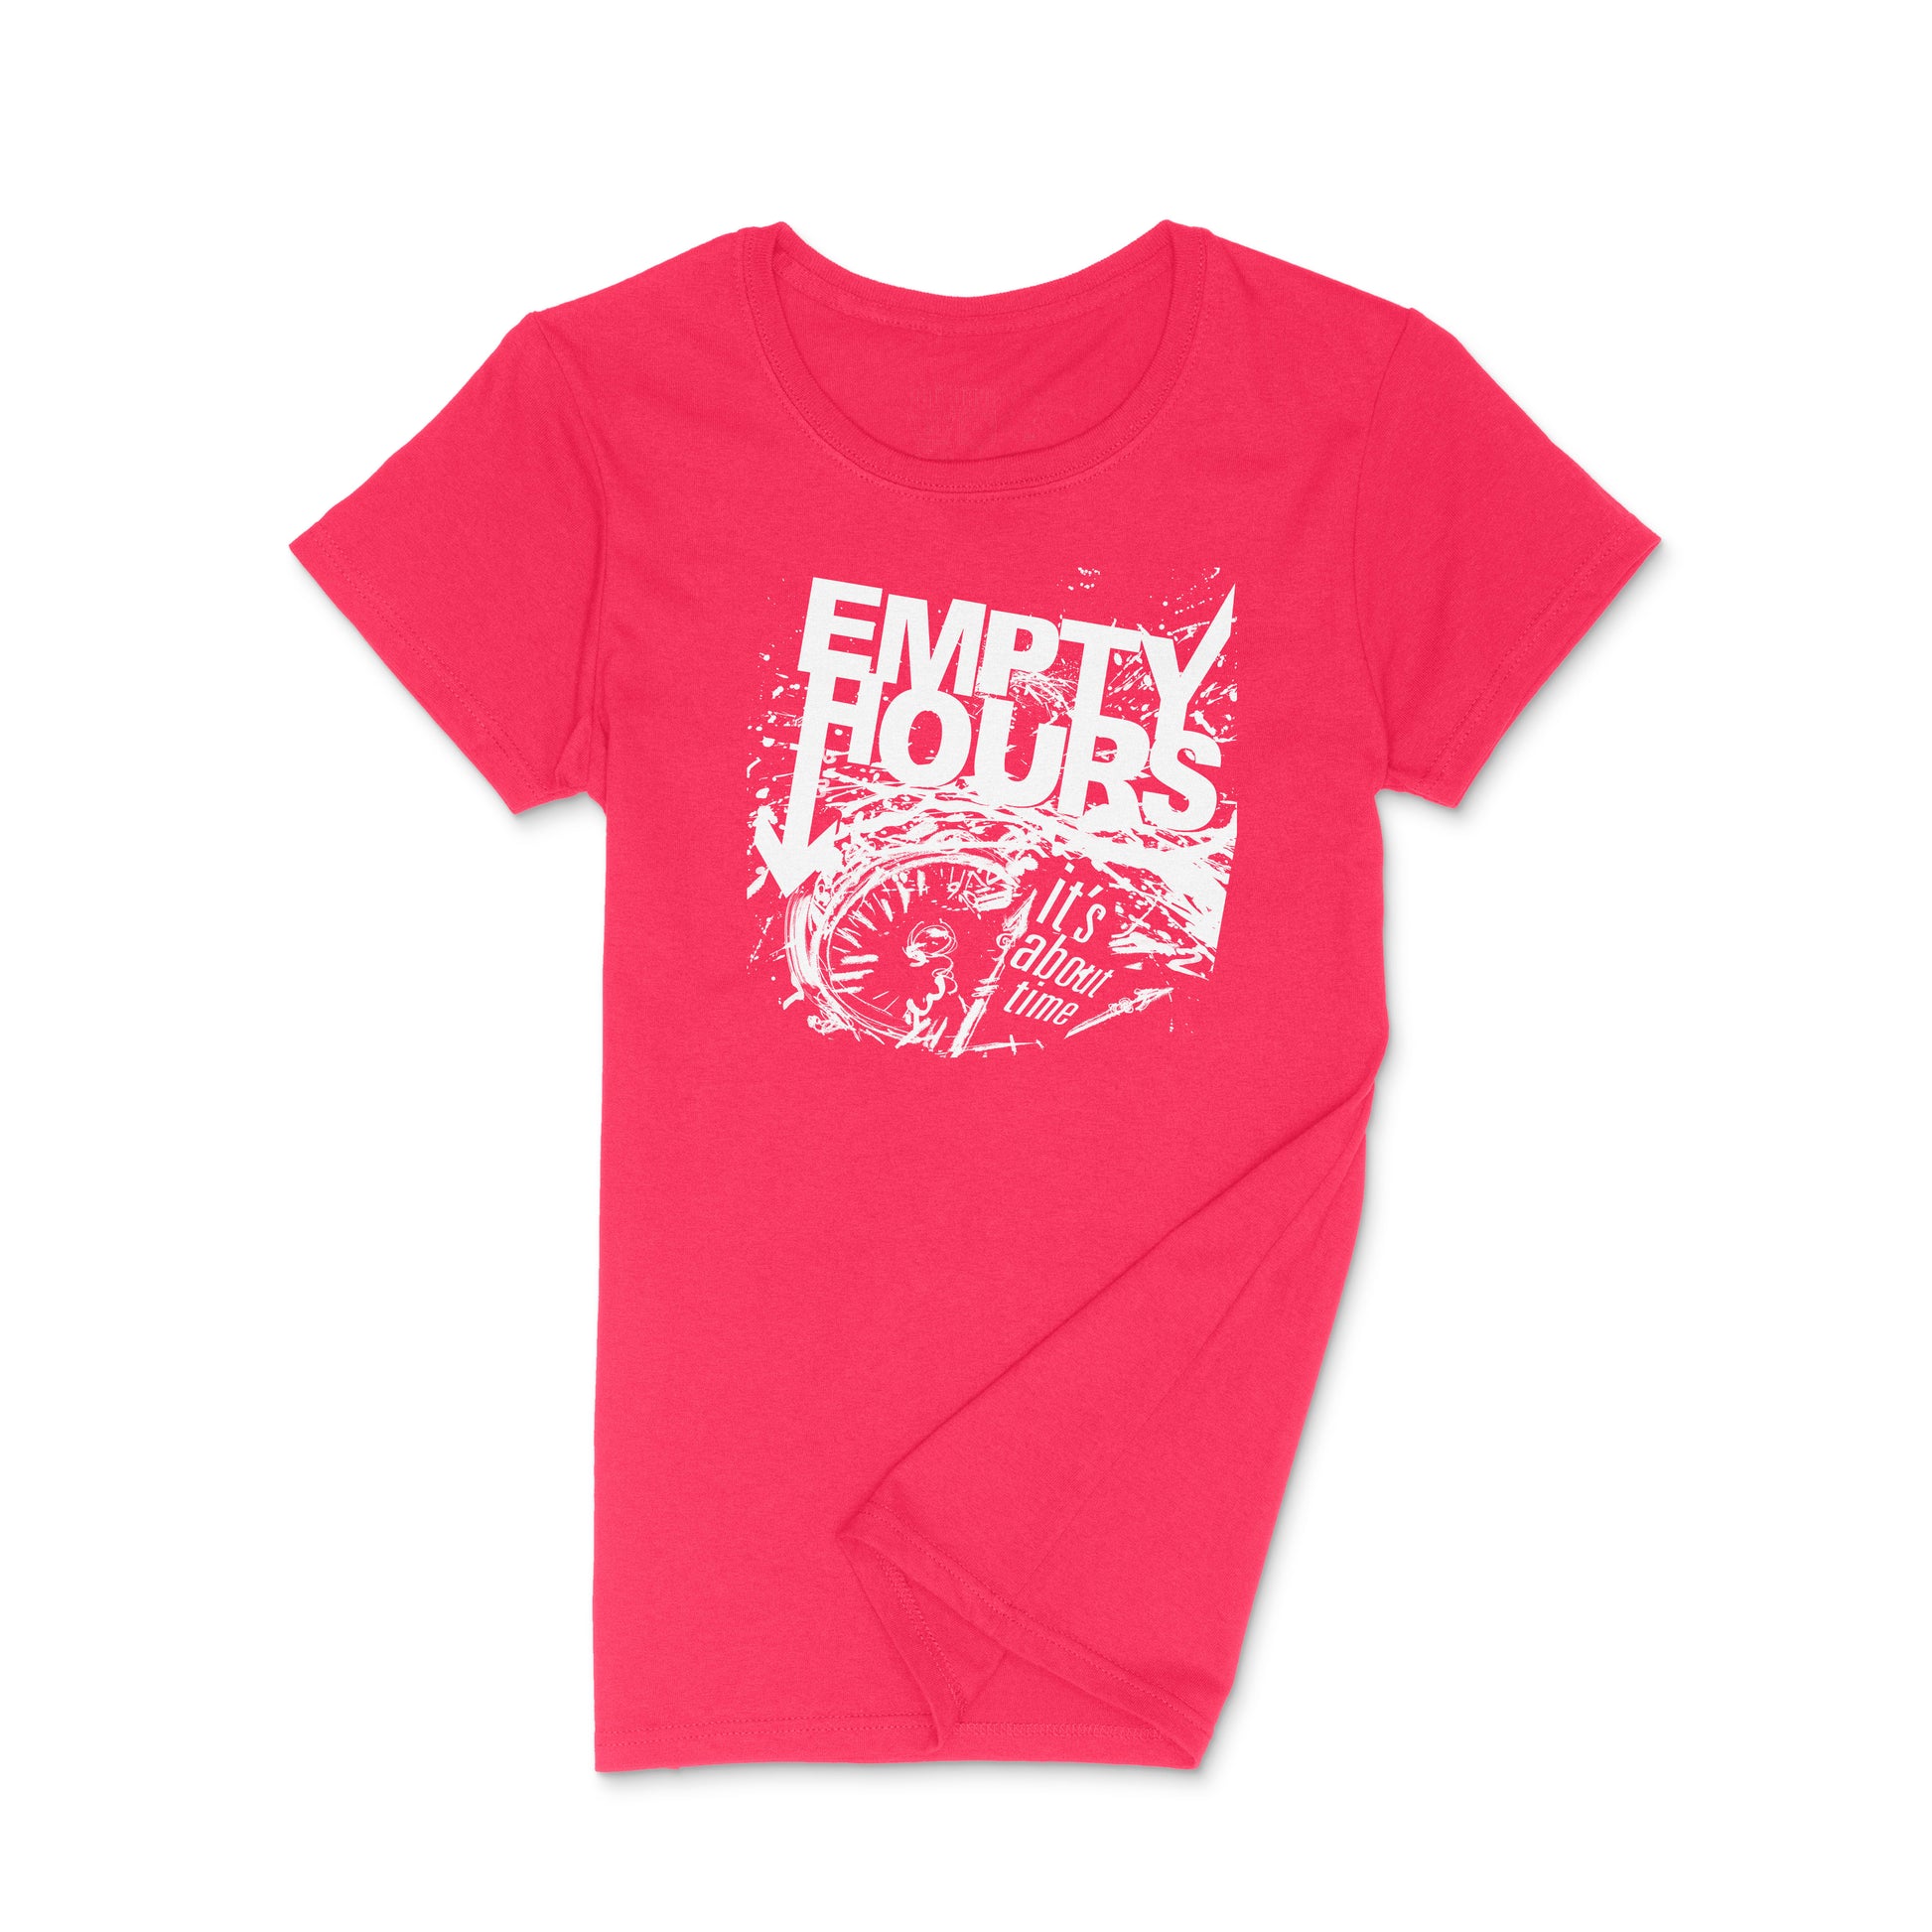 Brantford, Empty Hours, Fat Dave, It's About Time album cover, Ladies Crew Neck Shirt, Musician, Red/White